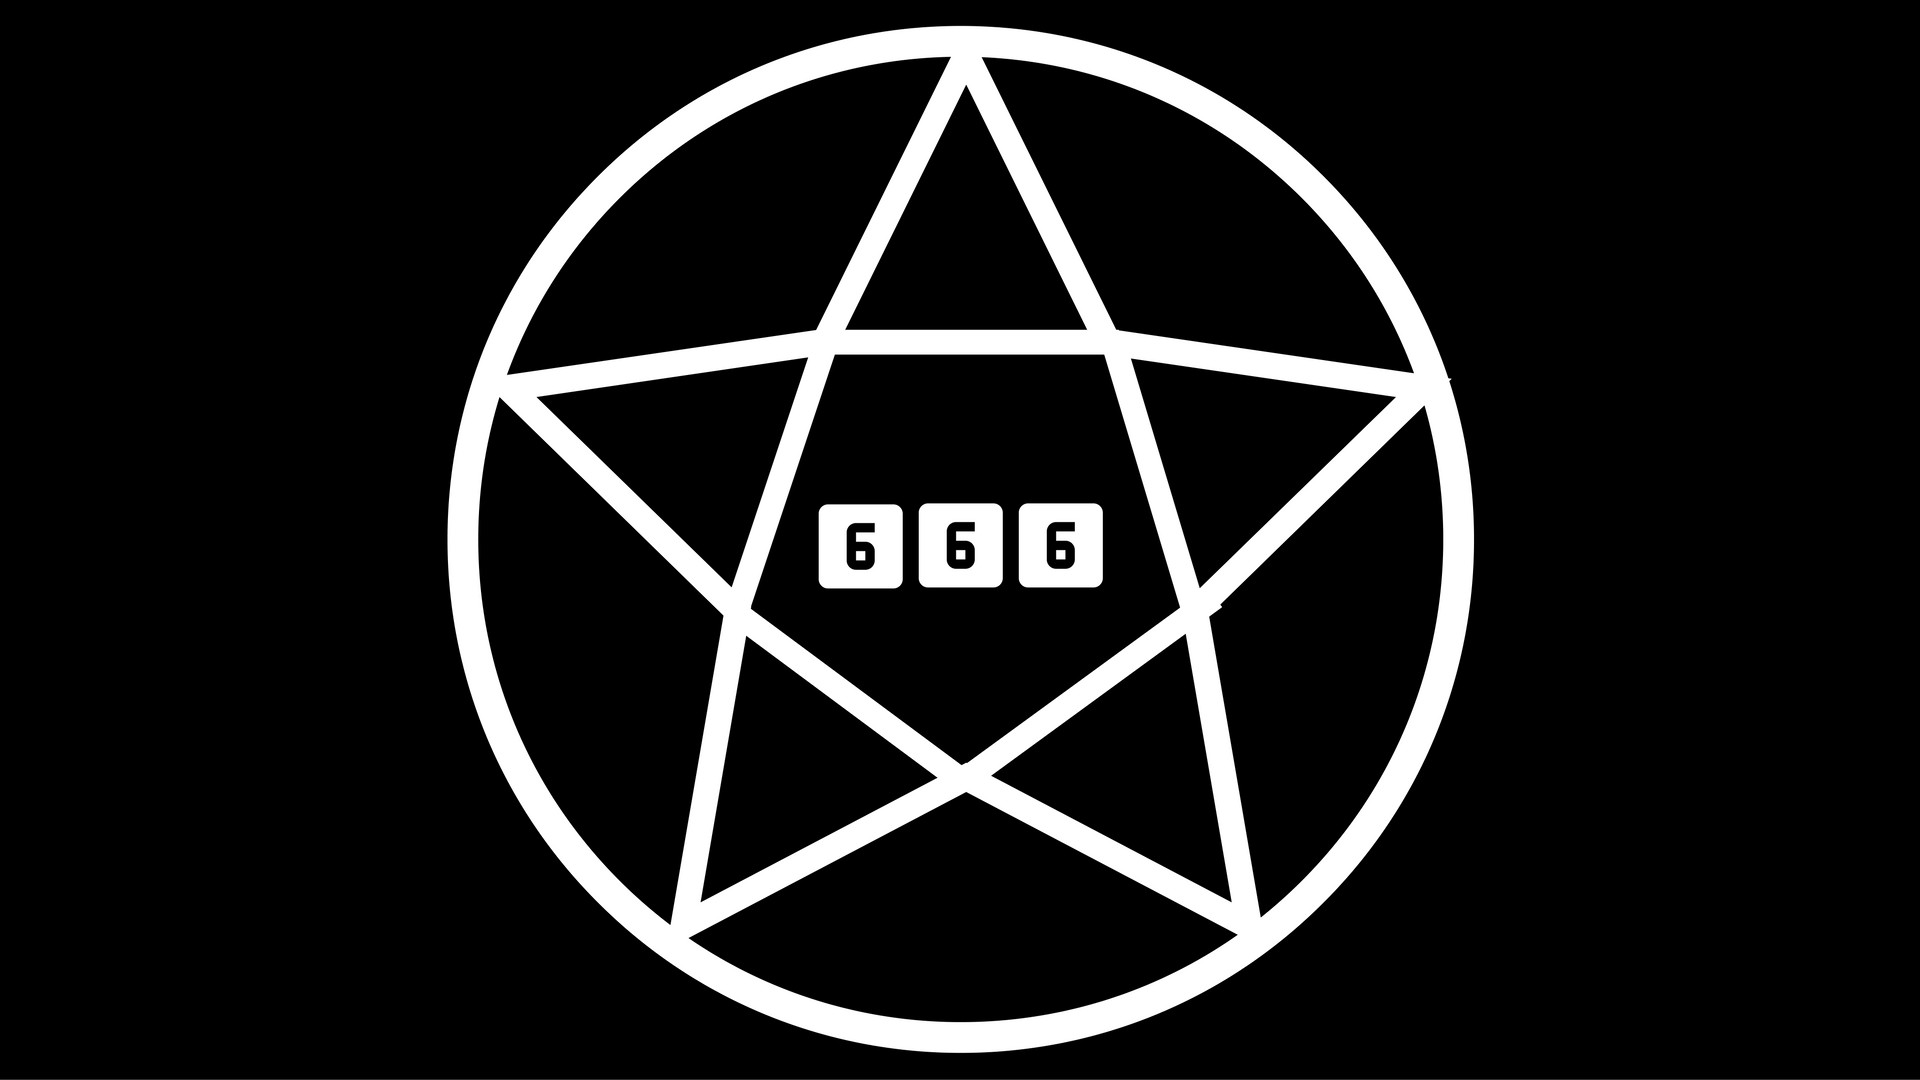 1920x1080 Design images pentagram 2.0 HD wallpaper and background photos